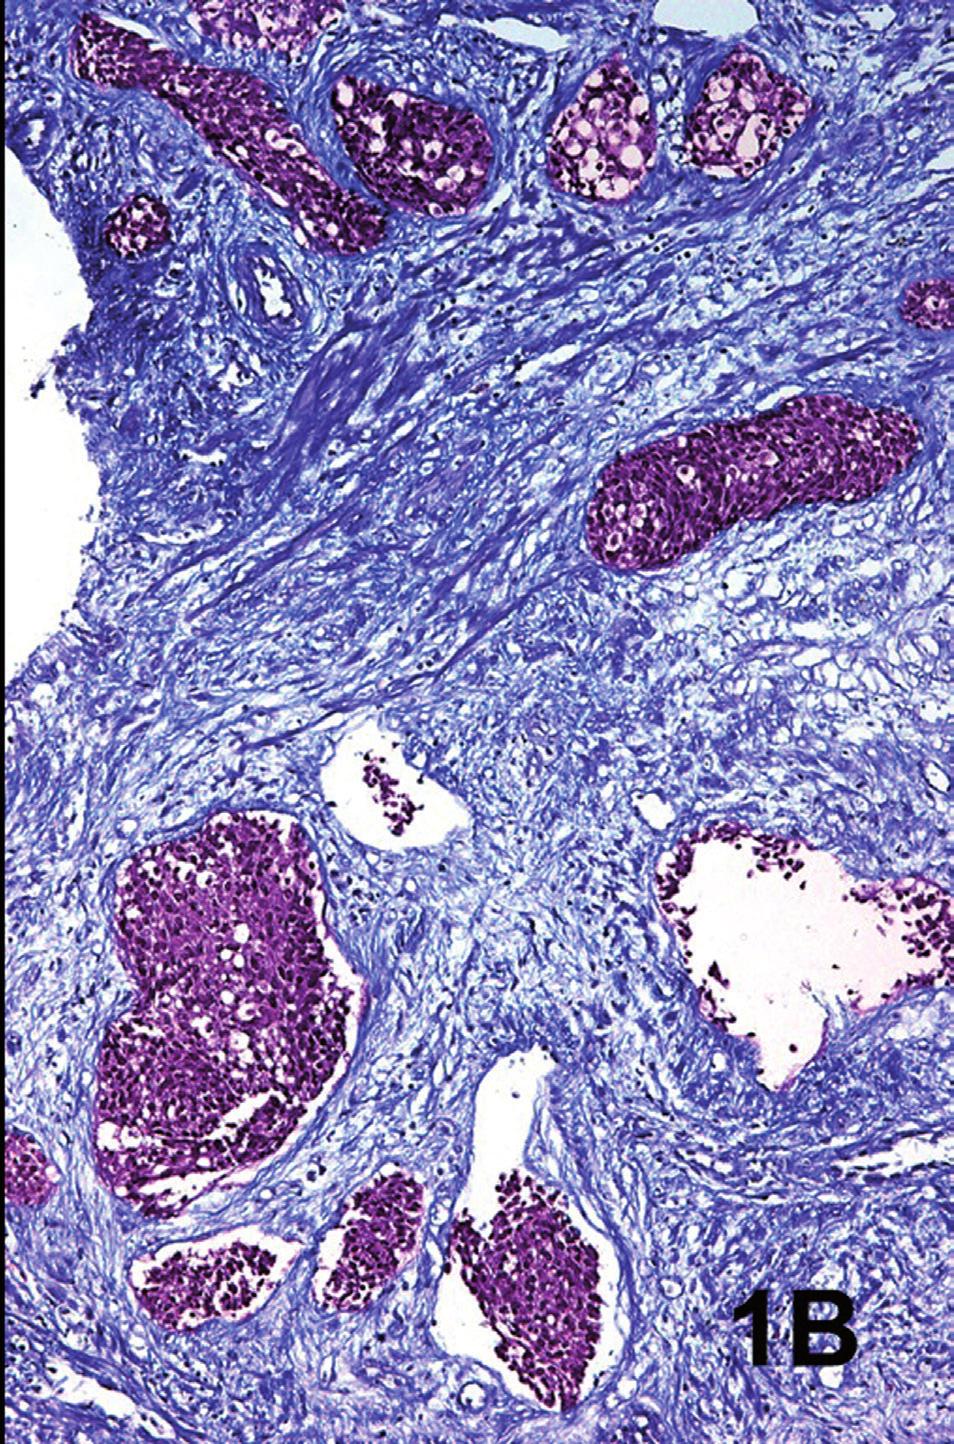 In both cases the tumor showed nests similar to those observed in the needle biopsies as well as cords of neoplastic cells with a clear infiltrative pattern that was not evident in the needle